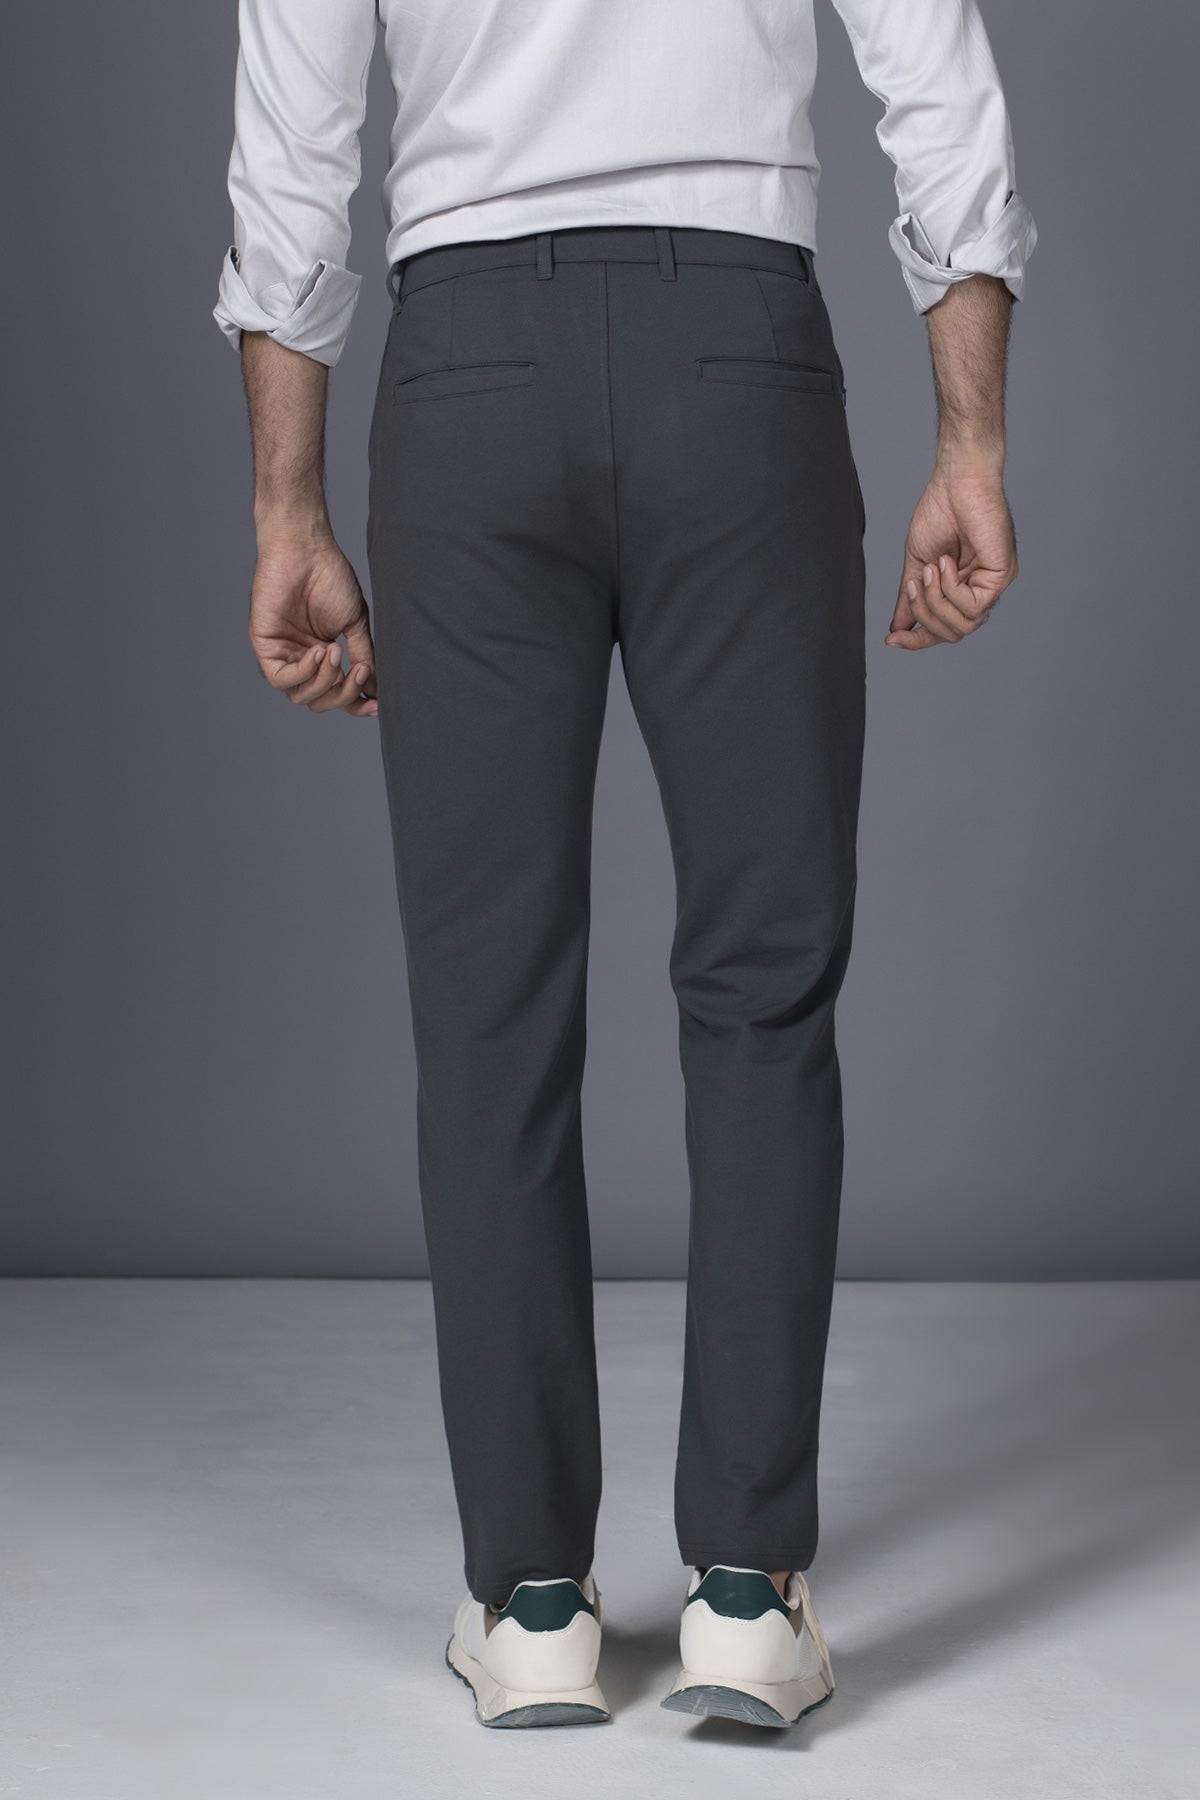 The Alloy Pant Beyours